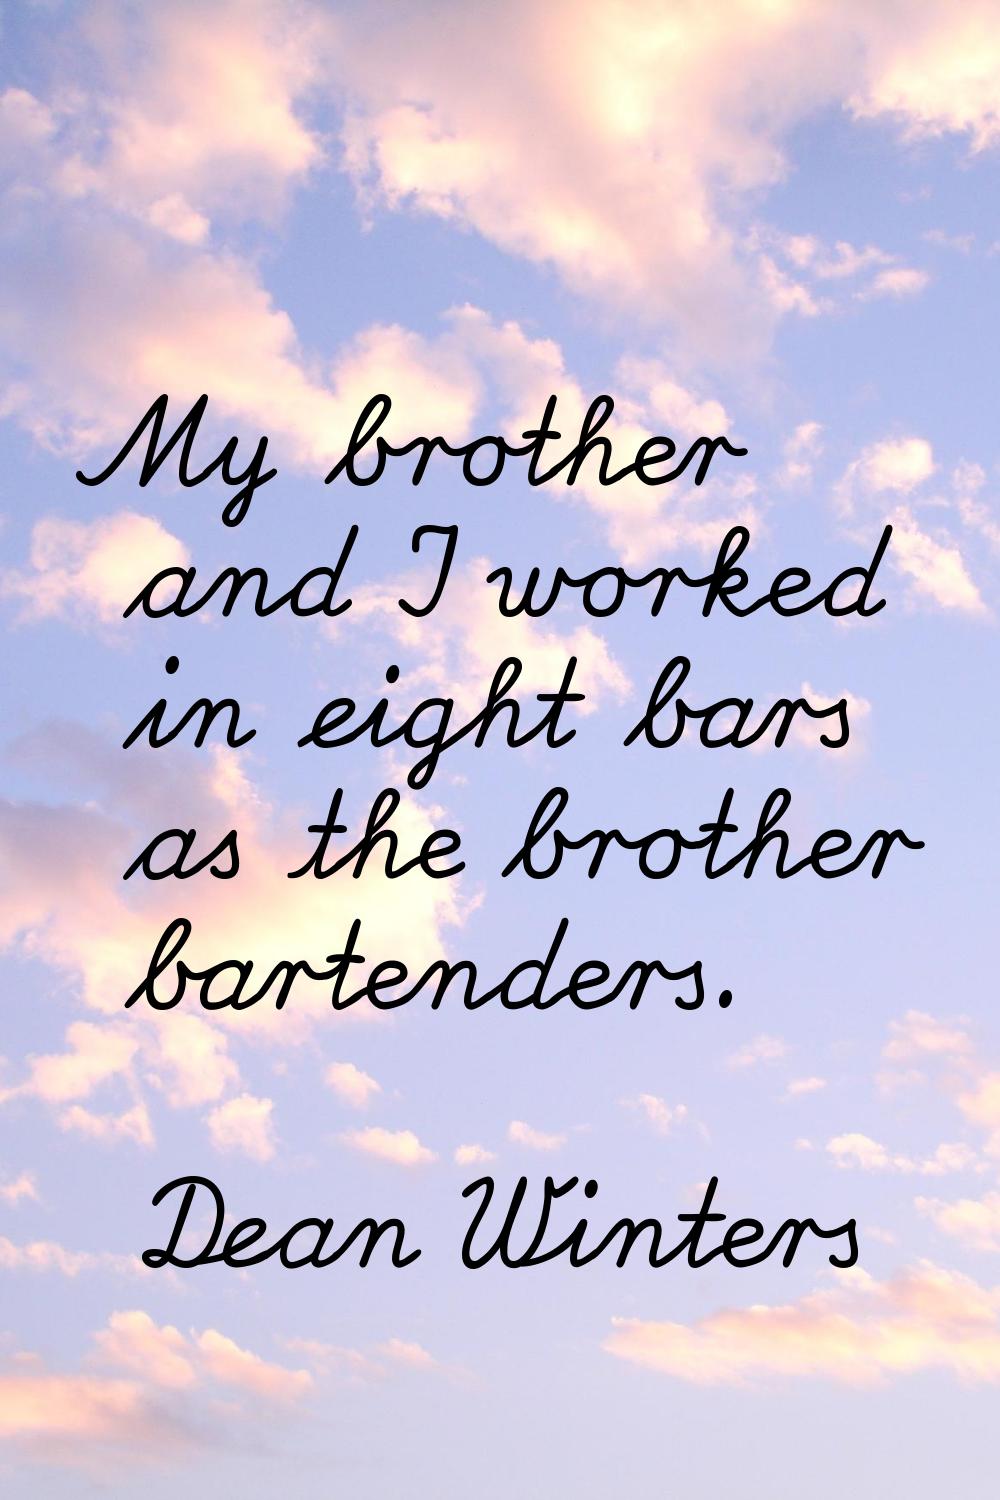 My brother and I worked in eight bars as the brother bartenders.